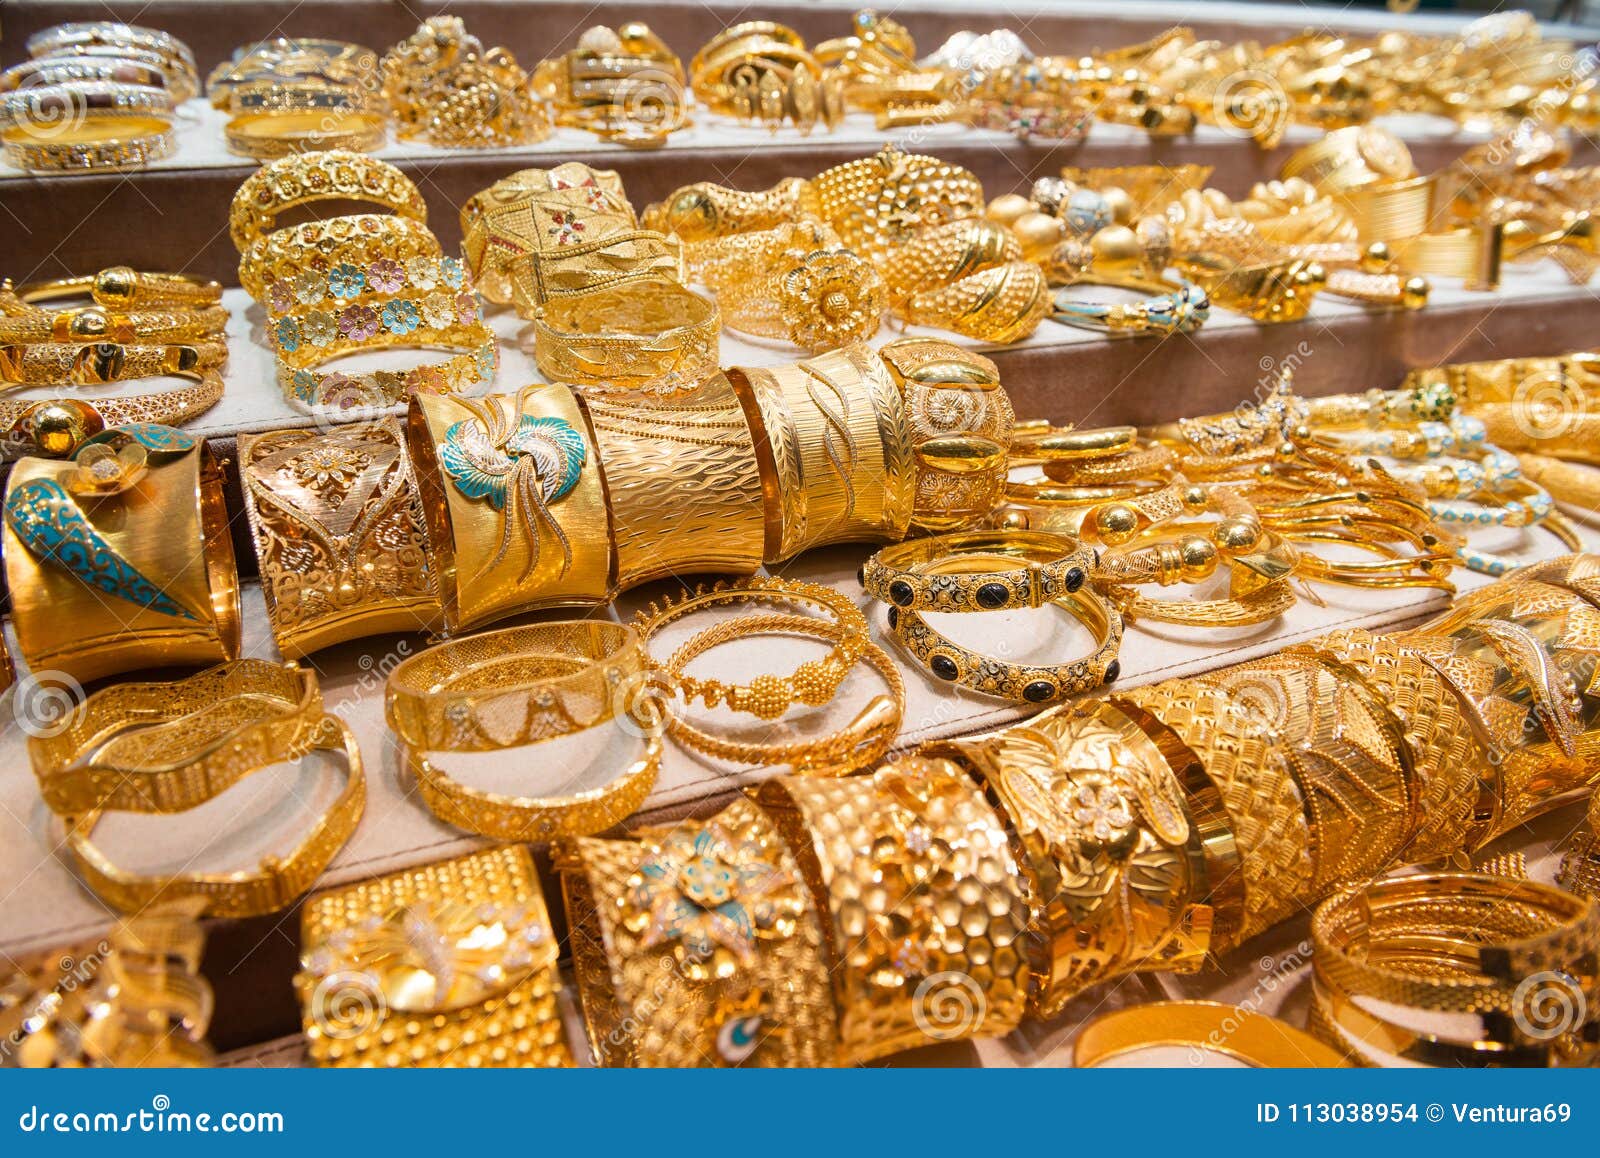  Jewellery  At The Gold  Market  Stock Photo Image of armlet 